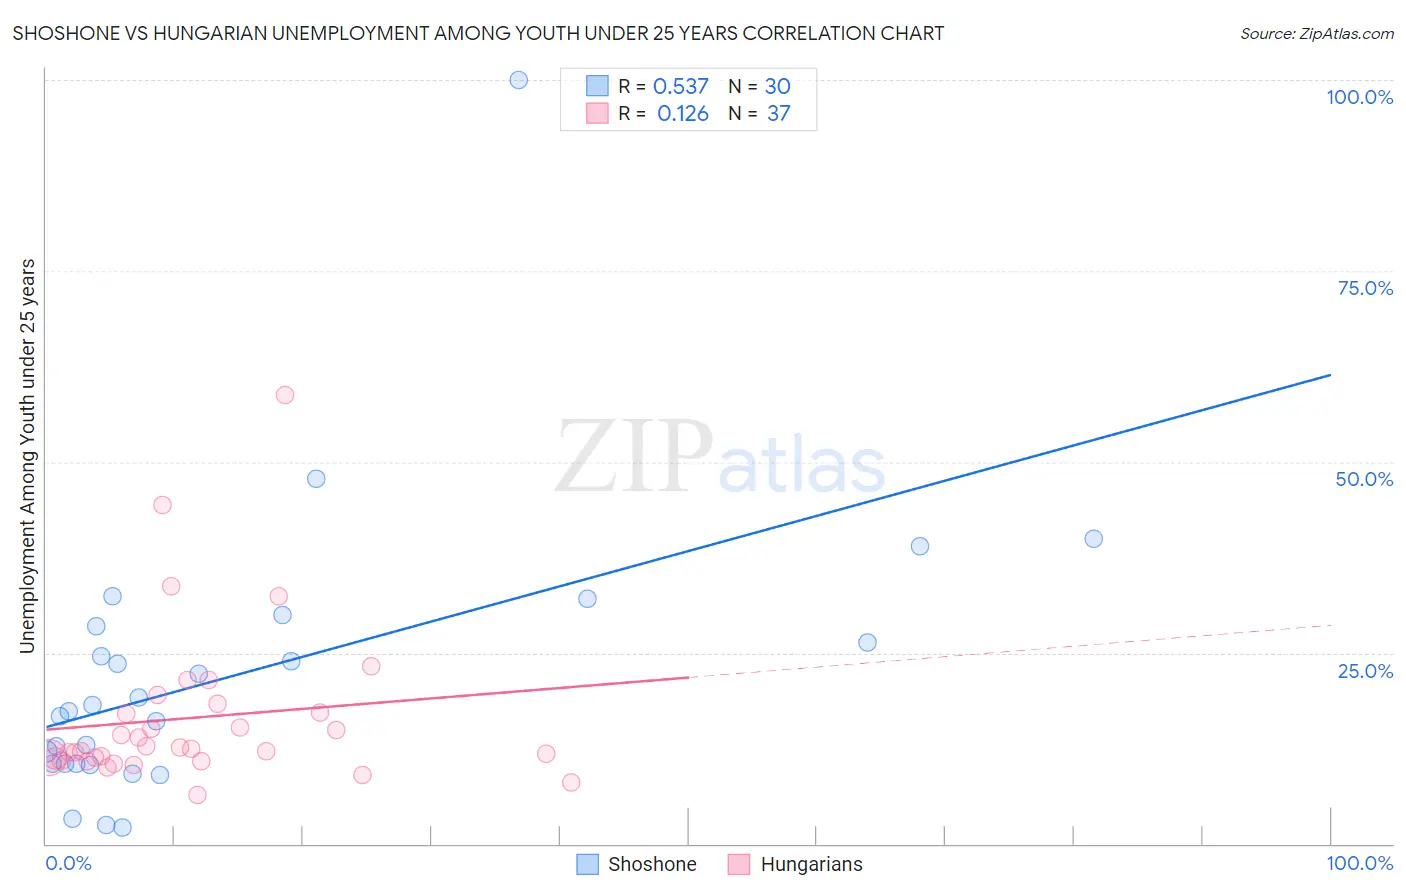 Shoshone vs Hungarian Unemployment Among Youth under 25 years